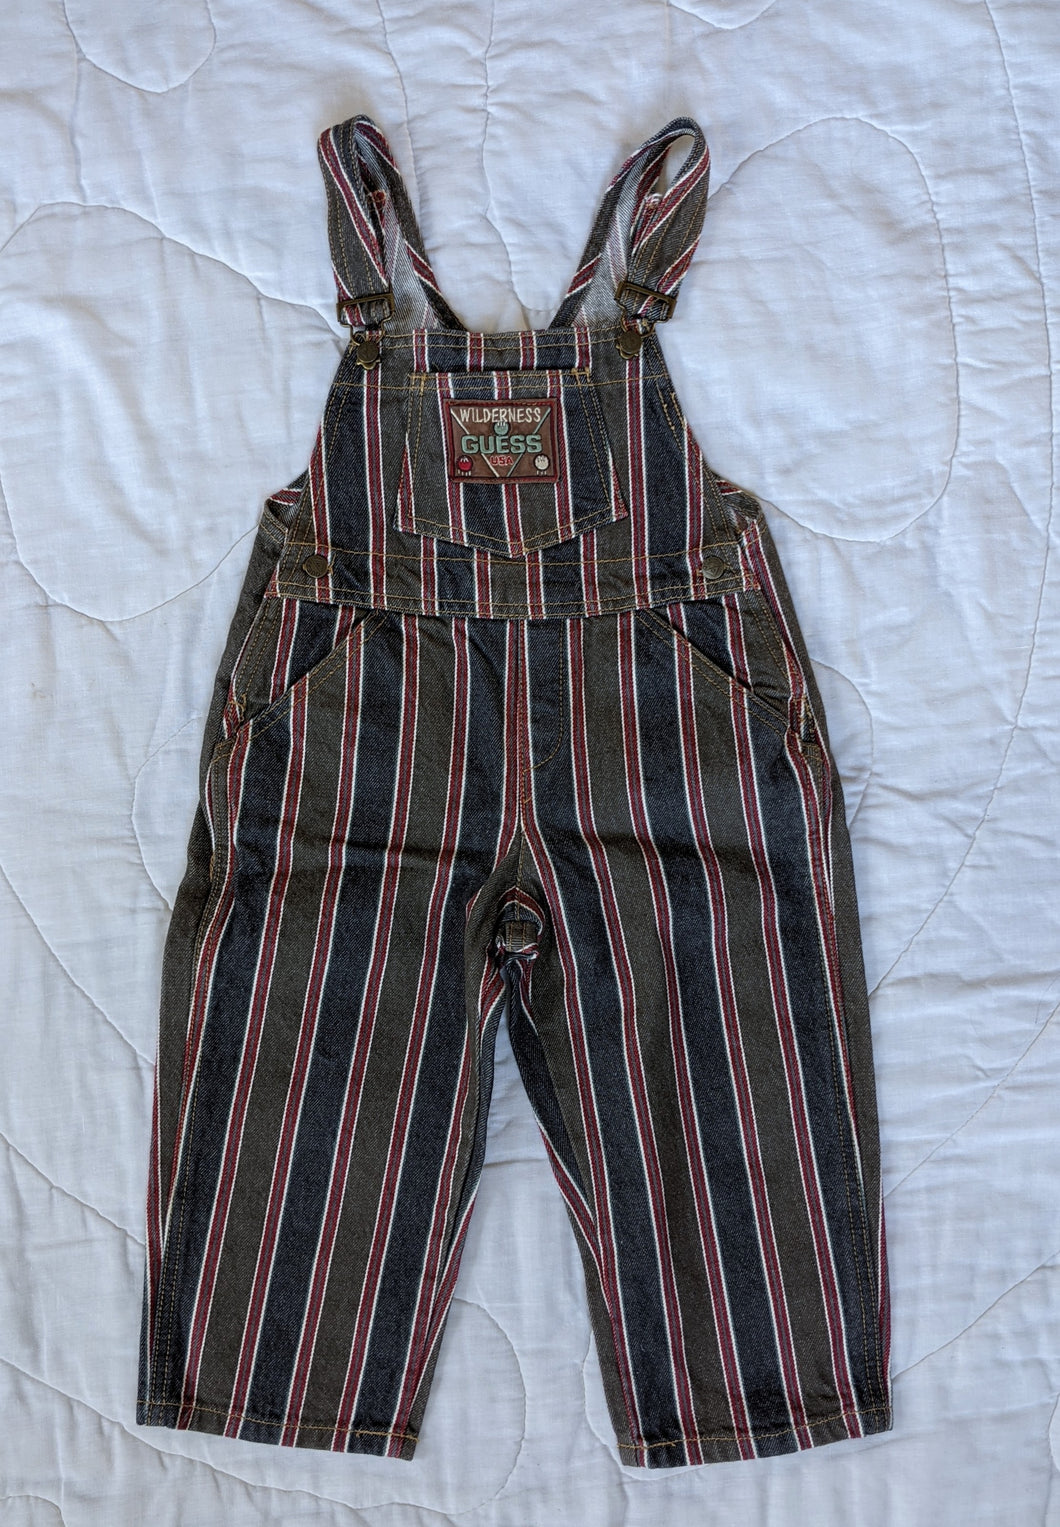 Guess Wilderness Striped Overalls 4T